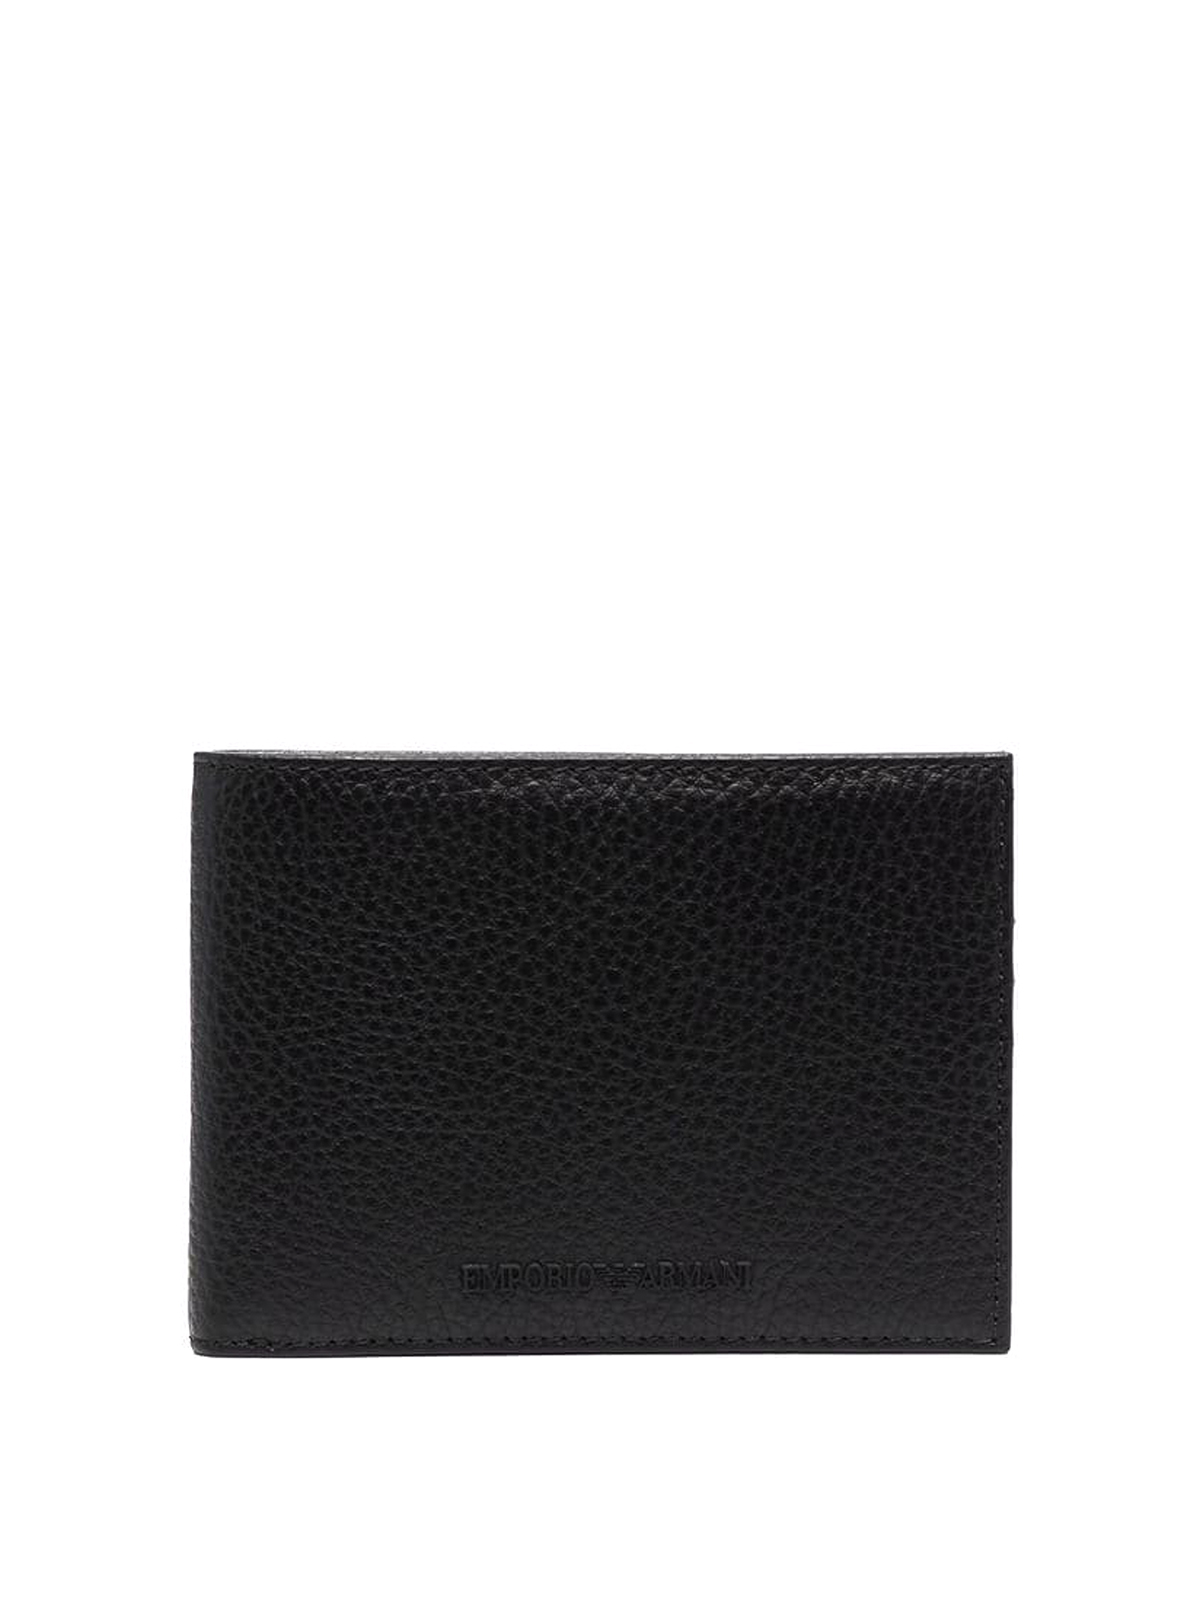 Leather wallet Emporio Armani Black in Leather - 25795933